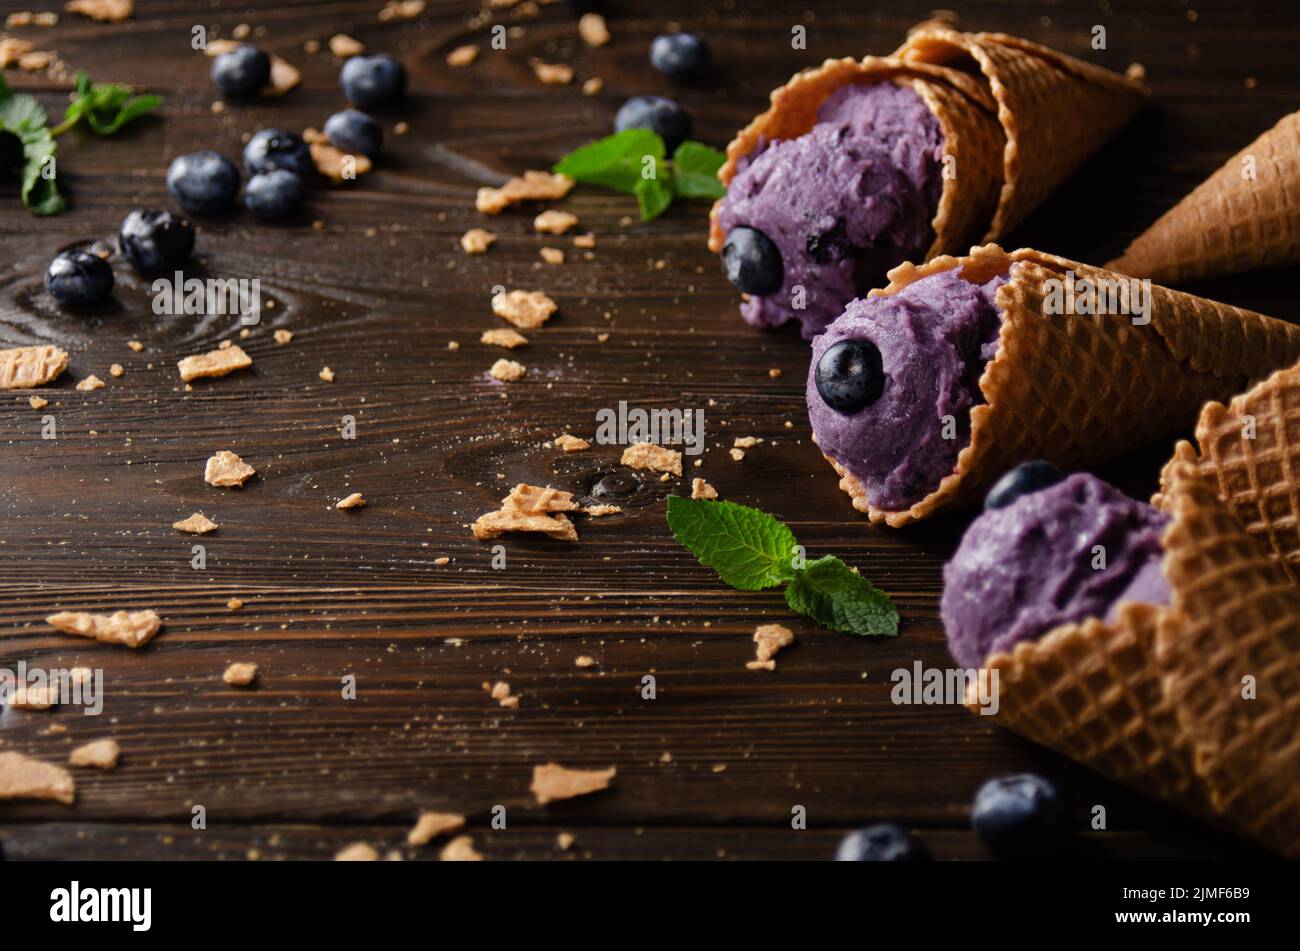 Wafer cones with blackberry icecream on wooden kitchen table with crumbs and berries aside Stock Photo